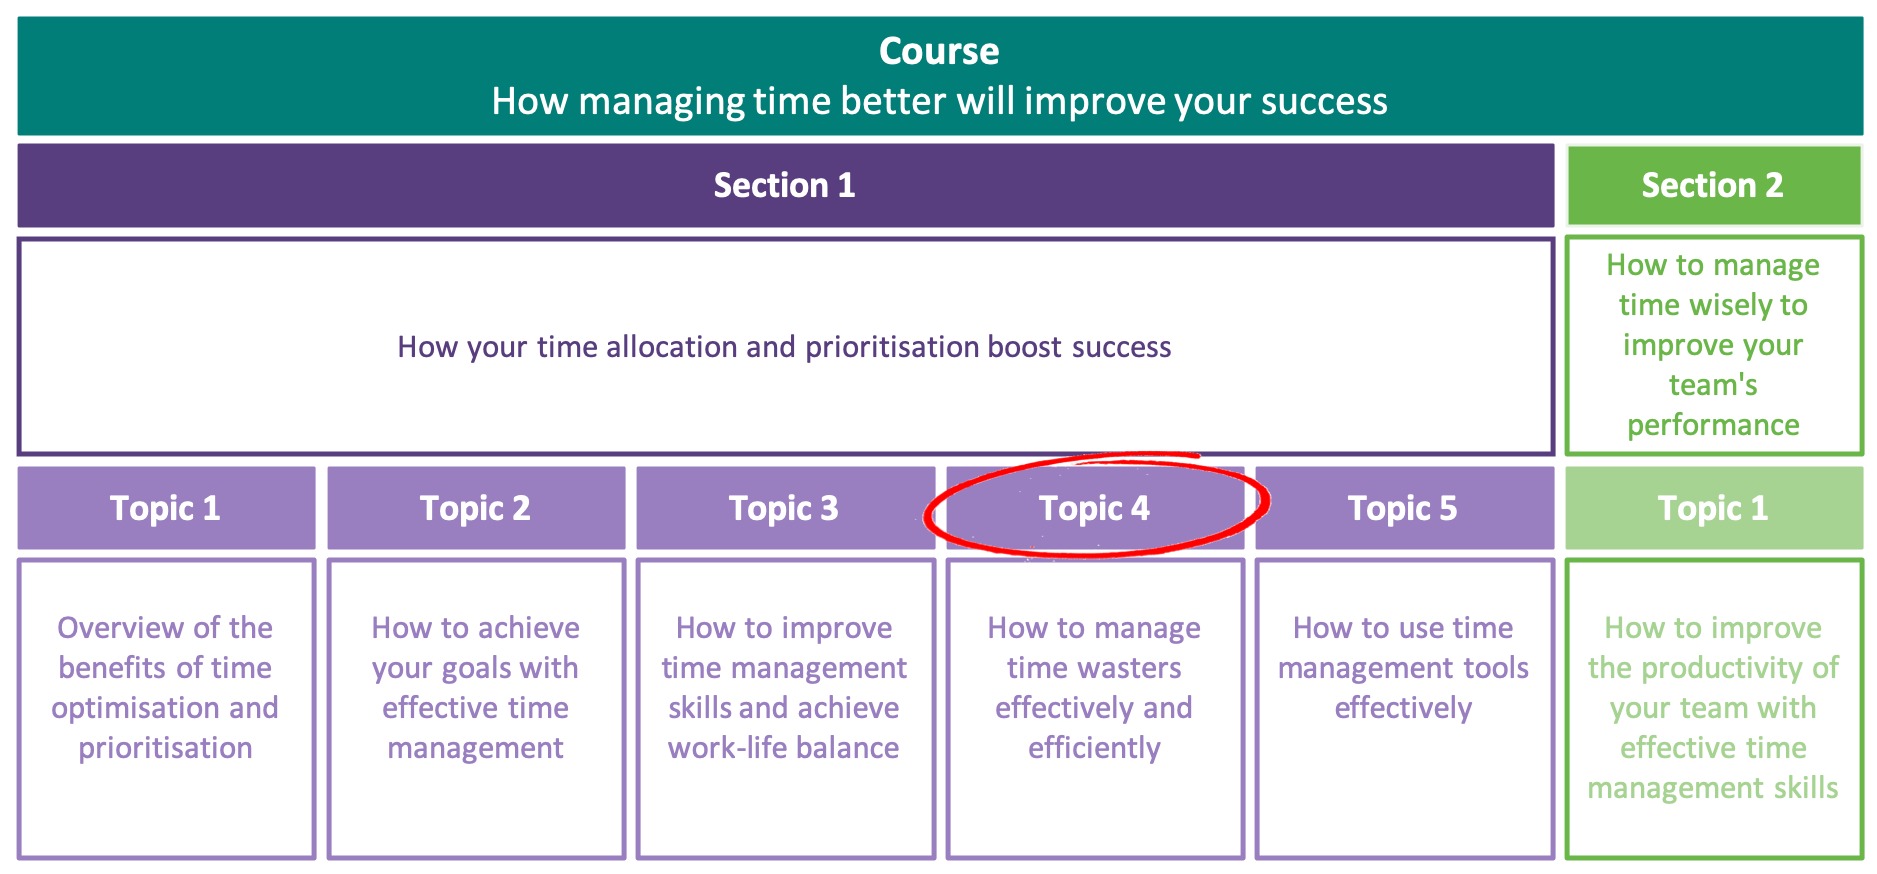 How to manage time wasters effectively and efficiently